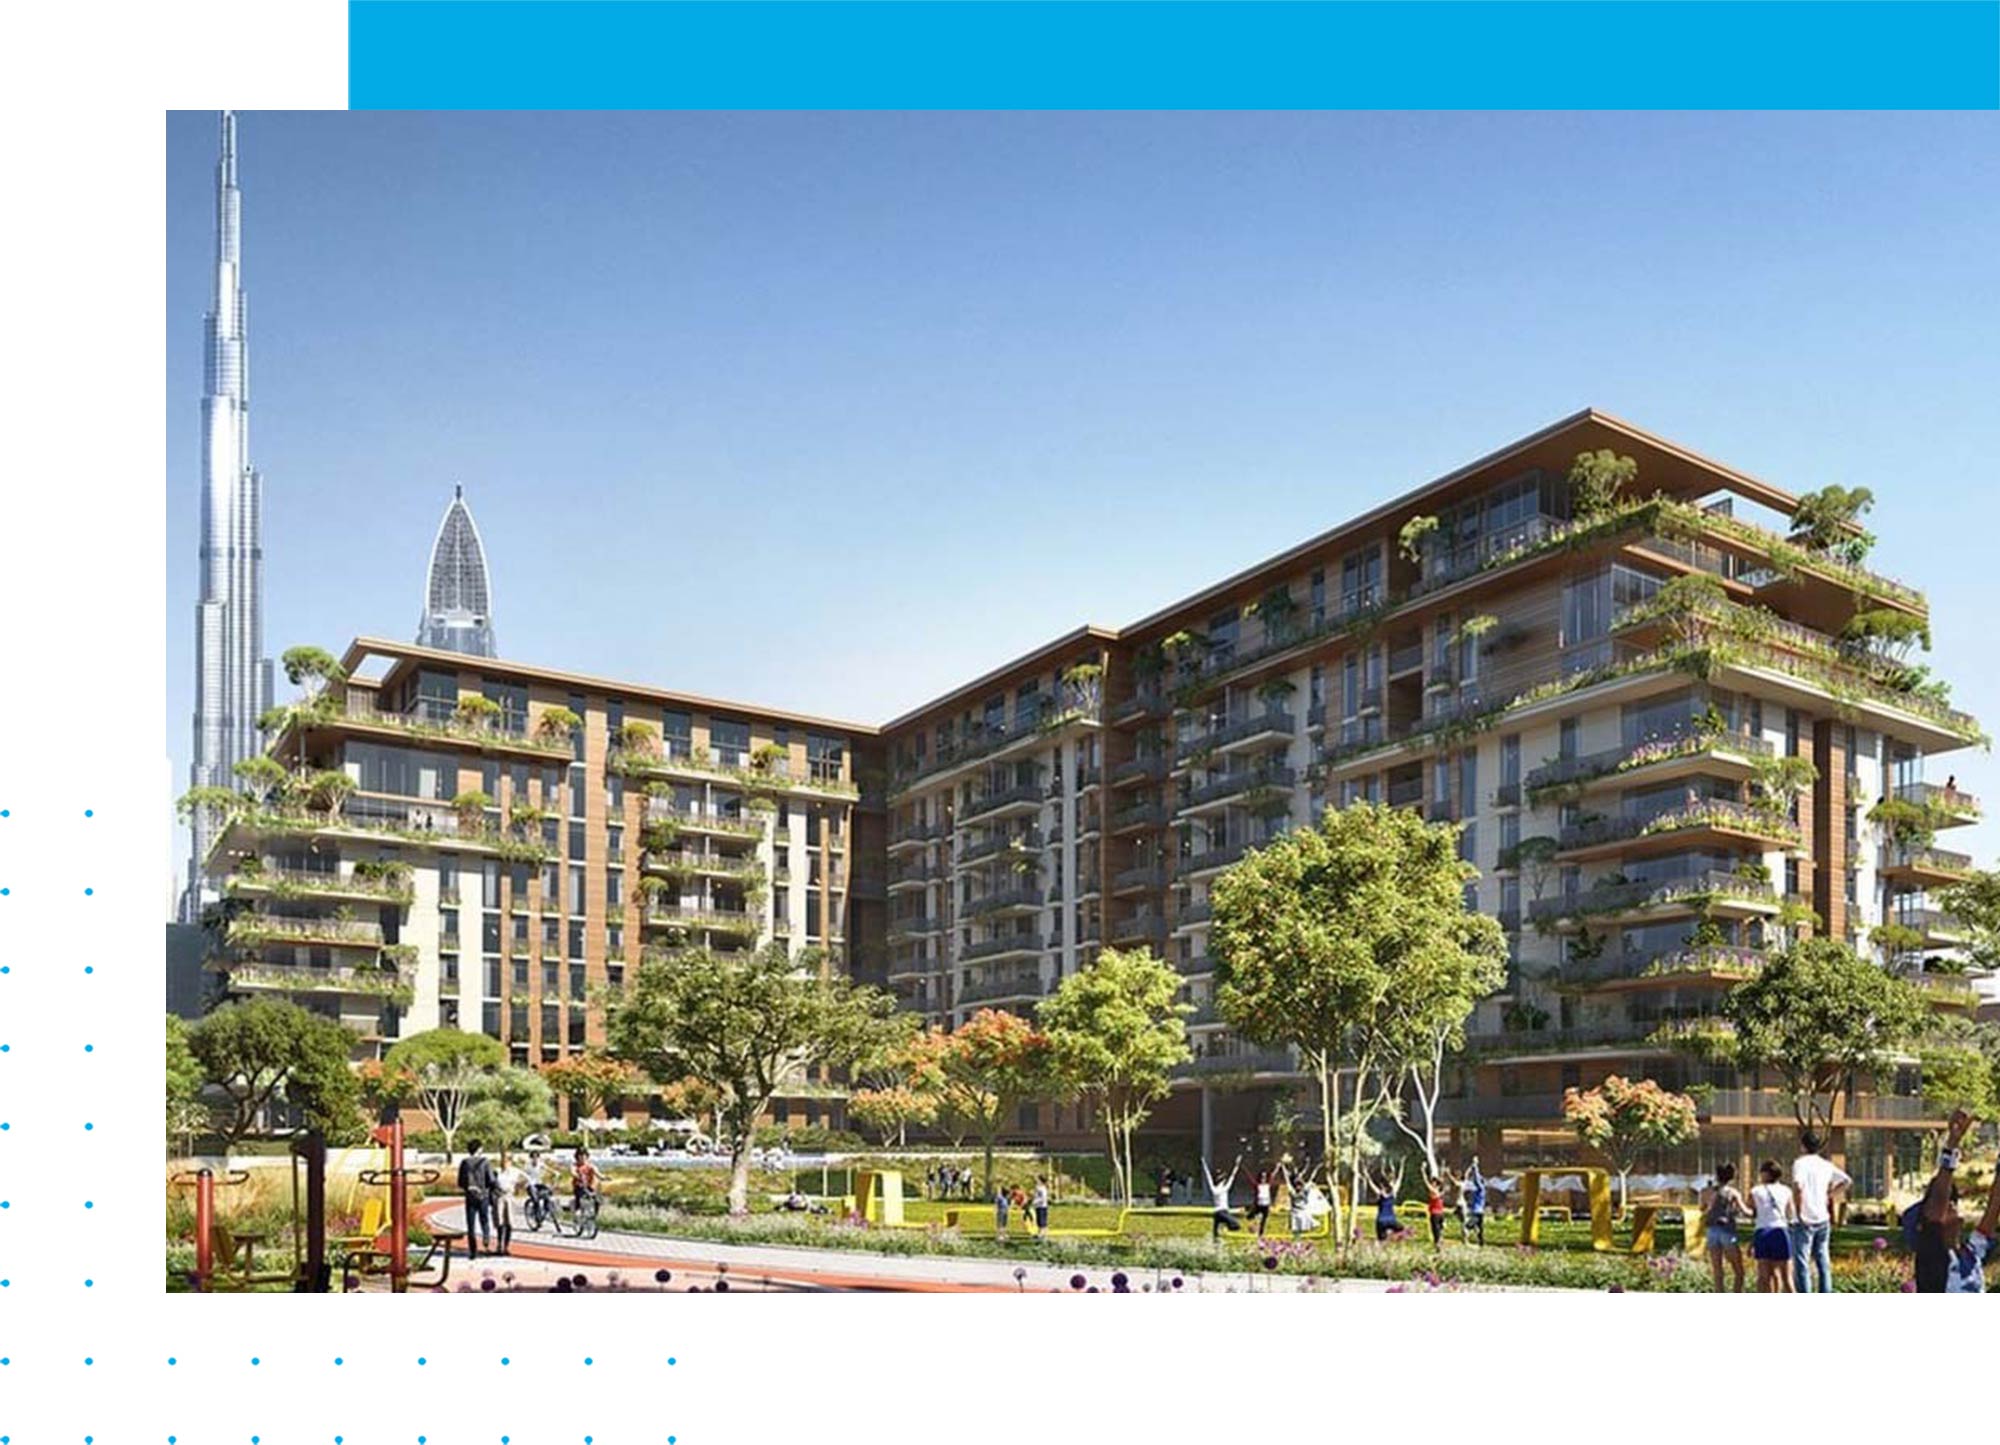 New Launch by Meraas Properties in Dubai - Central Park at City Walk: opr.ae